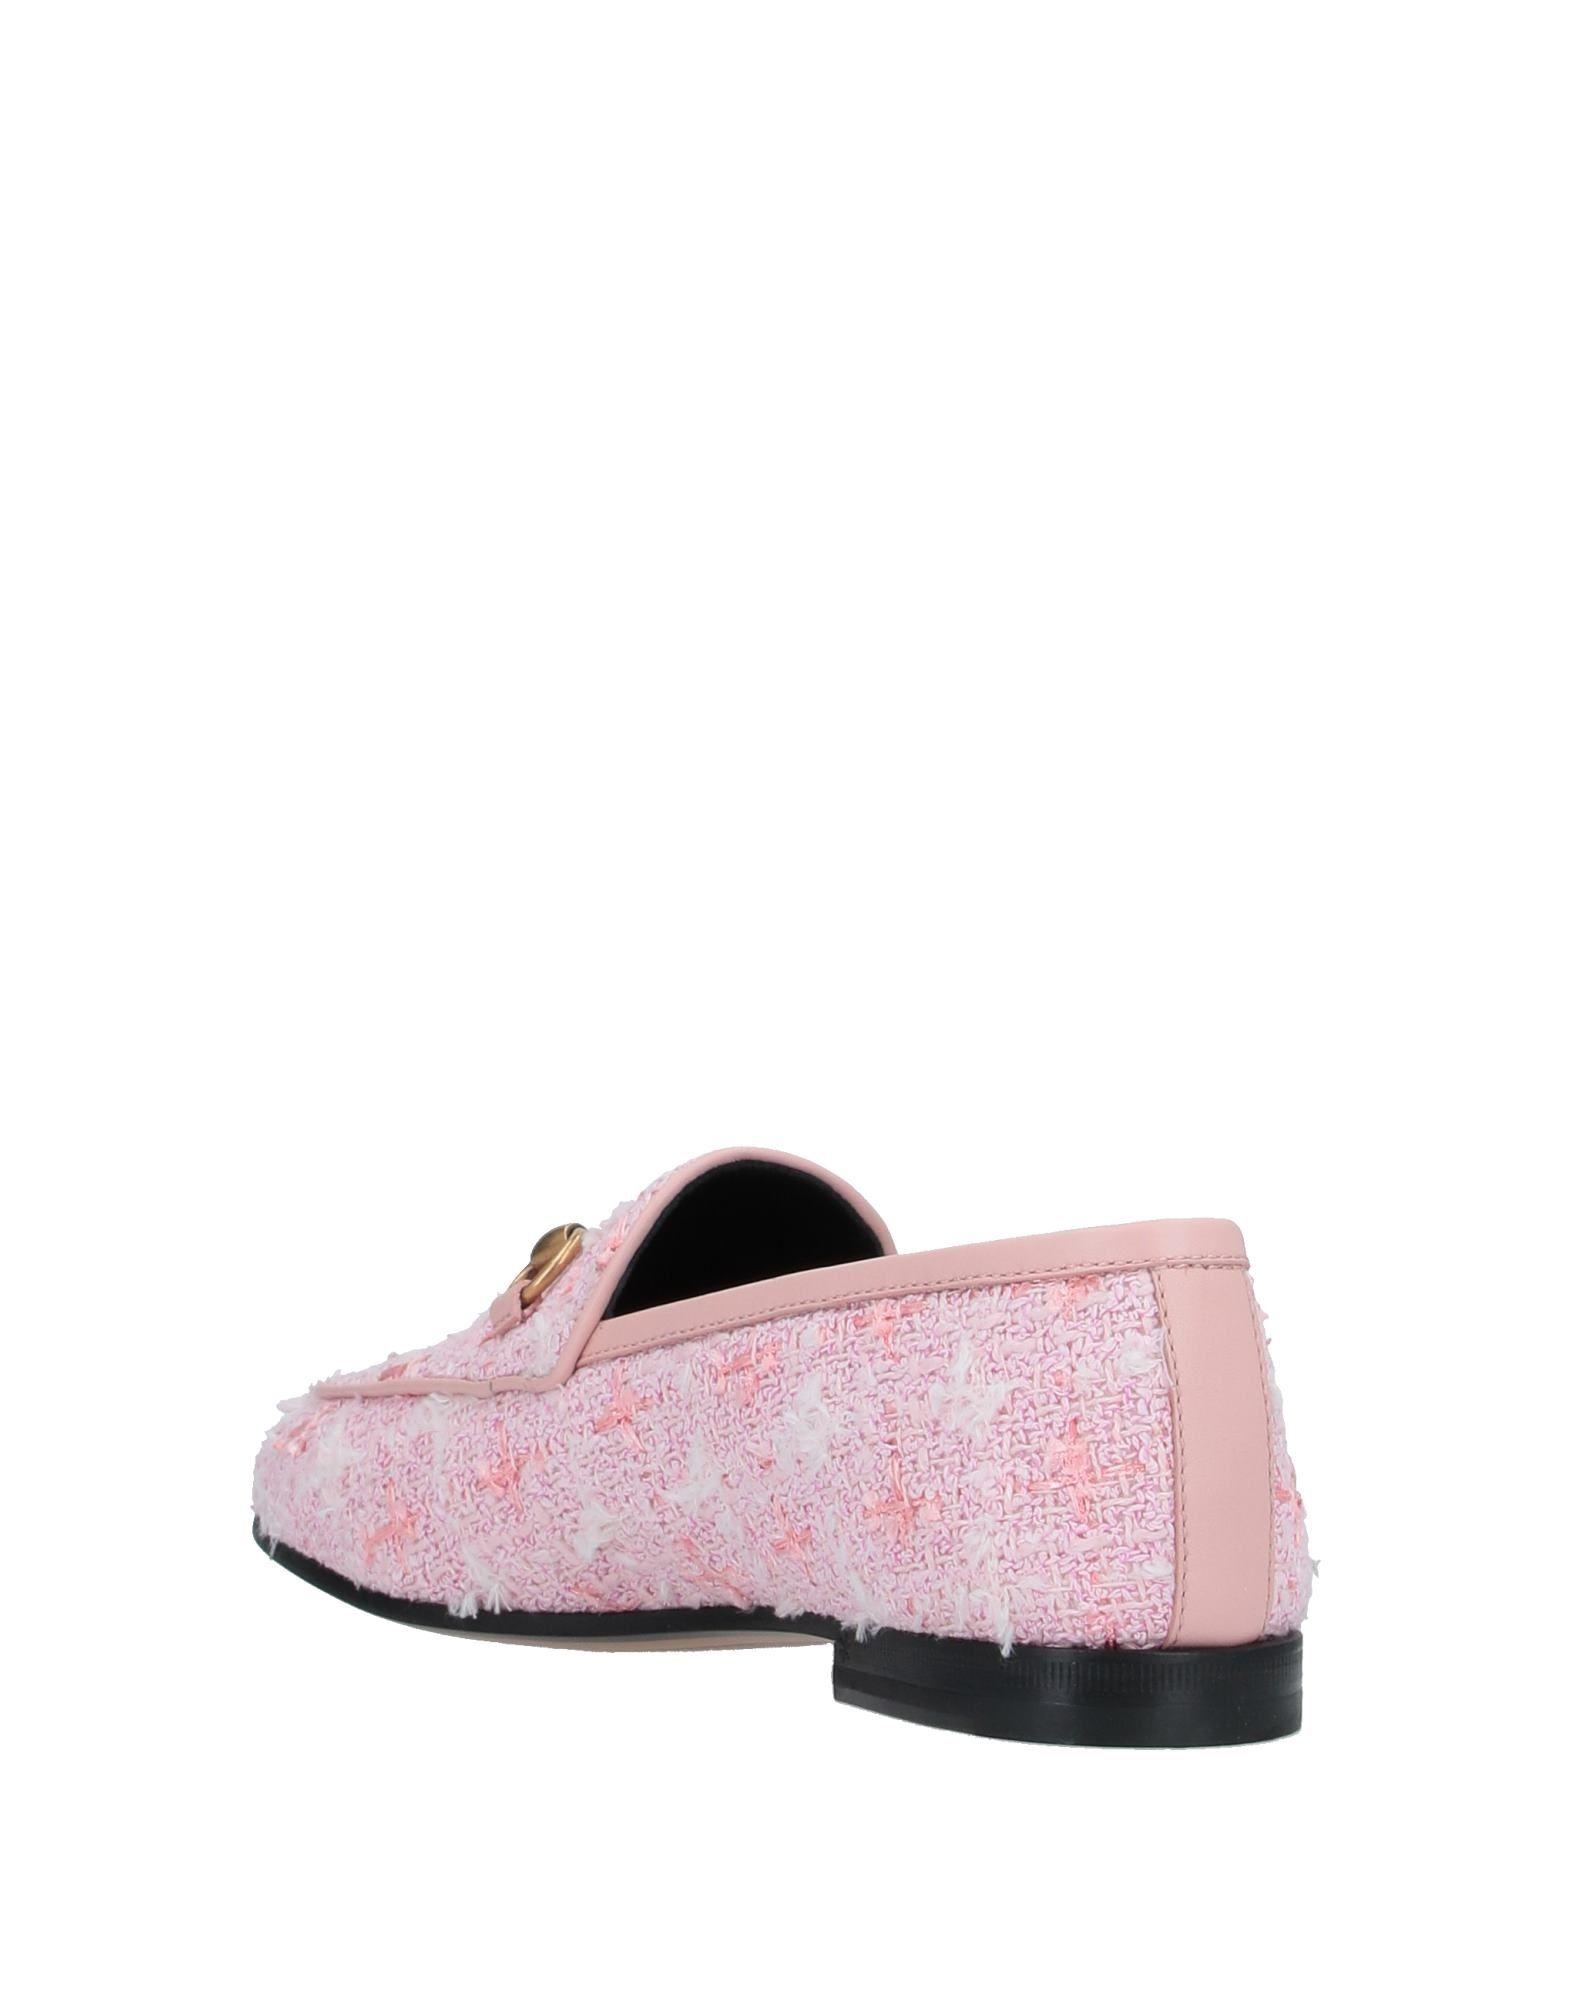 gucci pink loafers